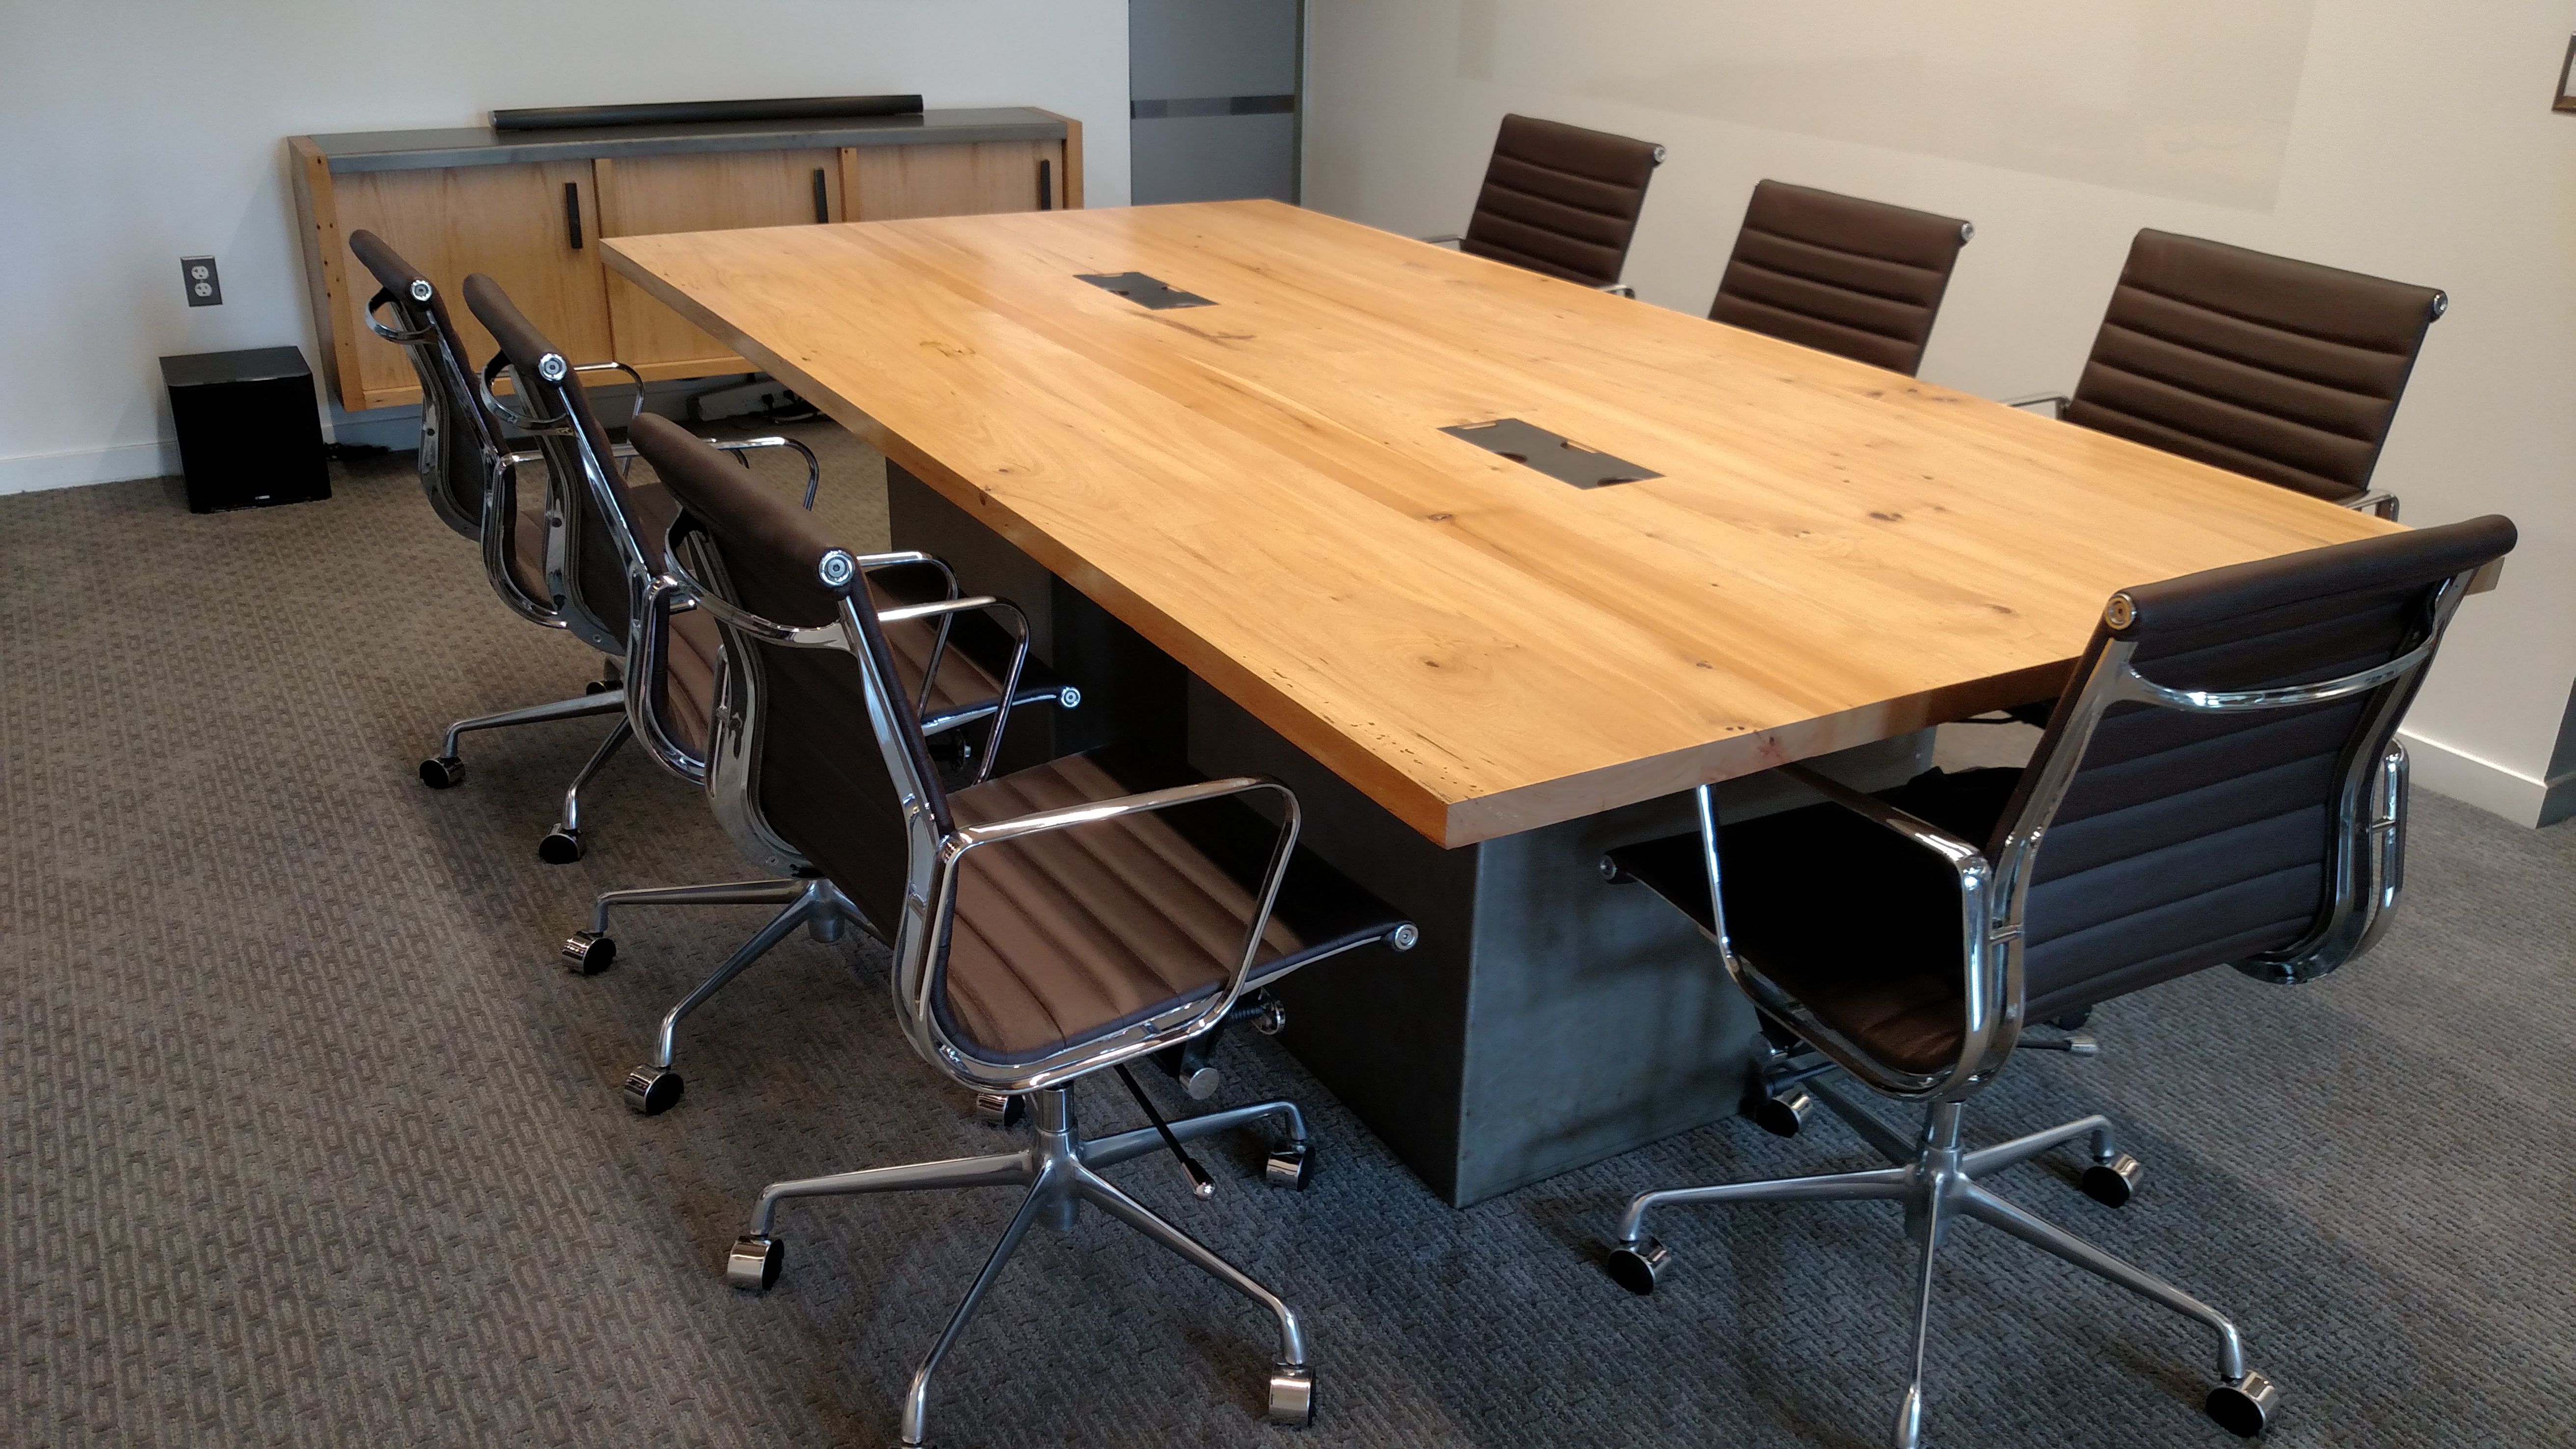 Hand Crafted Reclaimed Wood And Steel Industrial Conference Table by re